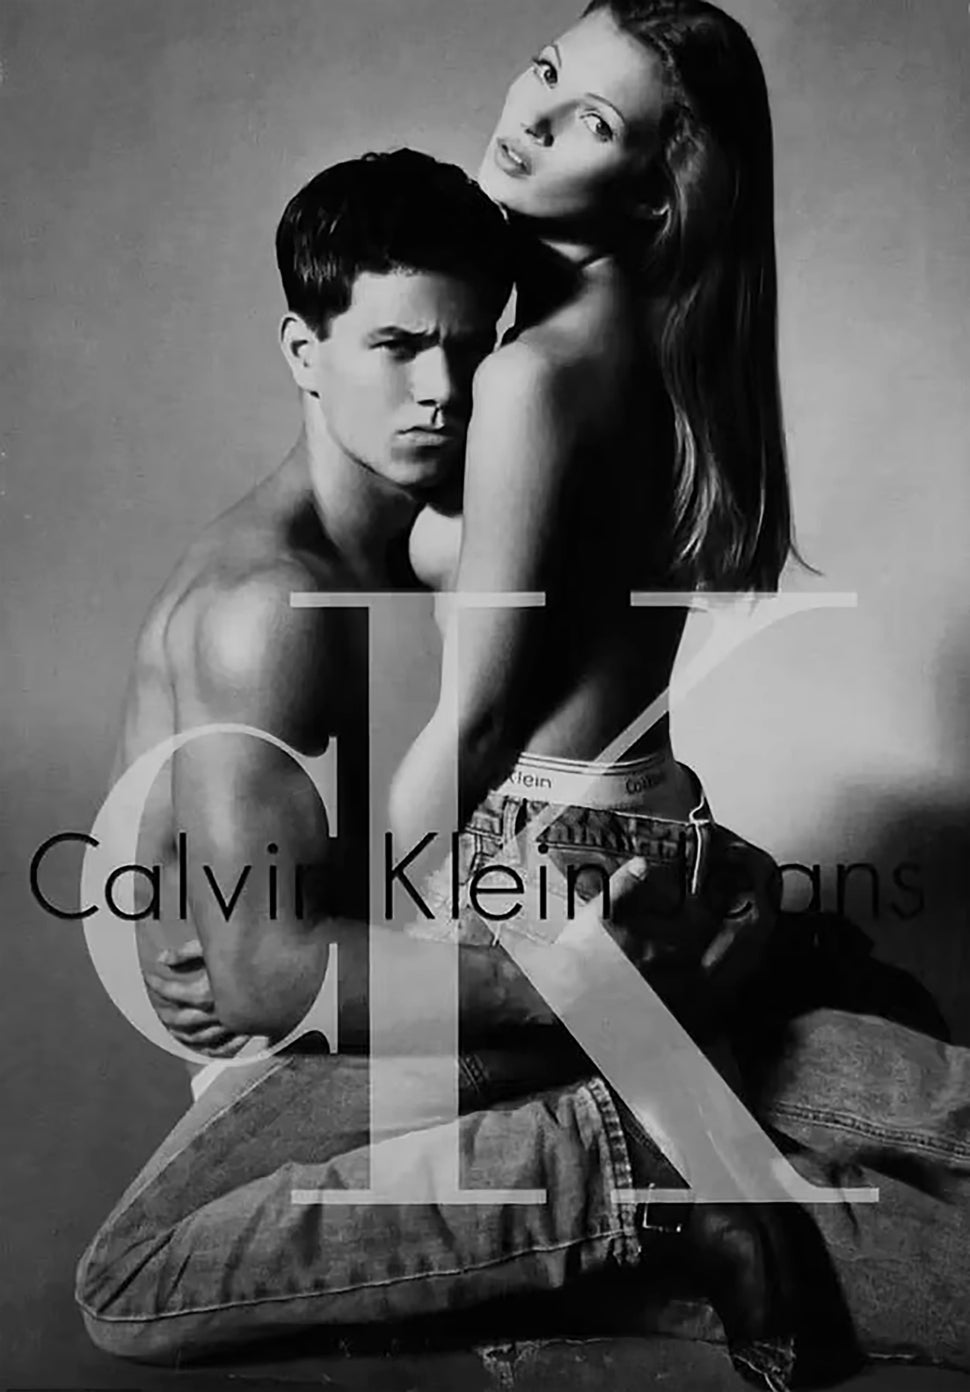 Kate Moss Says She Felt 'Vulnerable and Scared' During Famous Calvin Klein  Photo Shoot With Mark Wahlberg | Entertainment Tonight